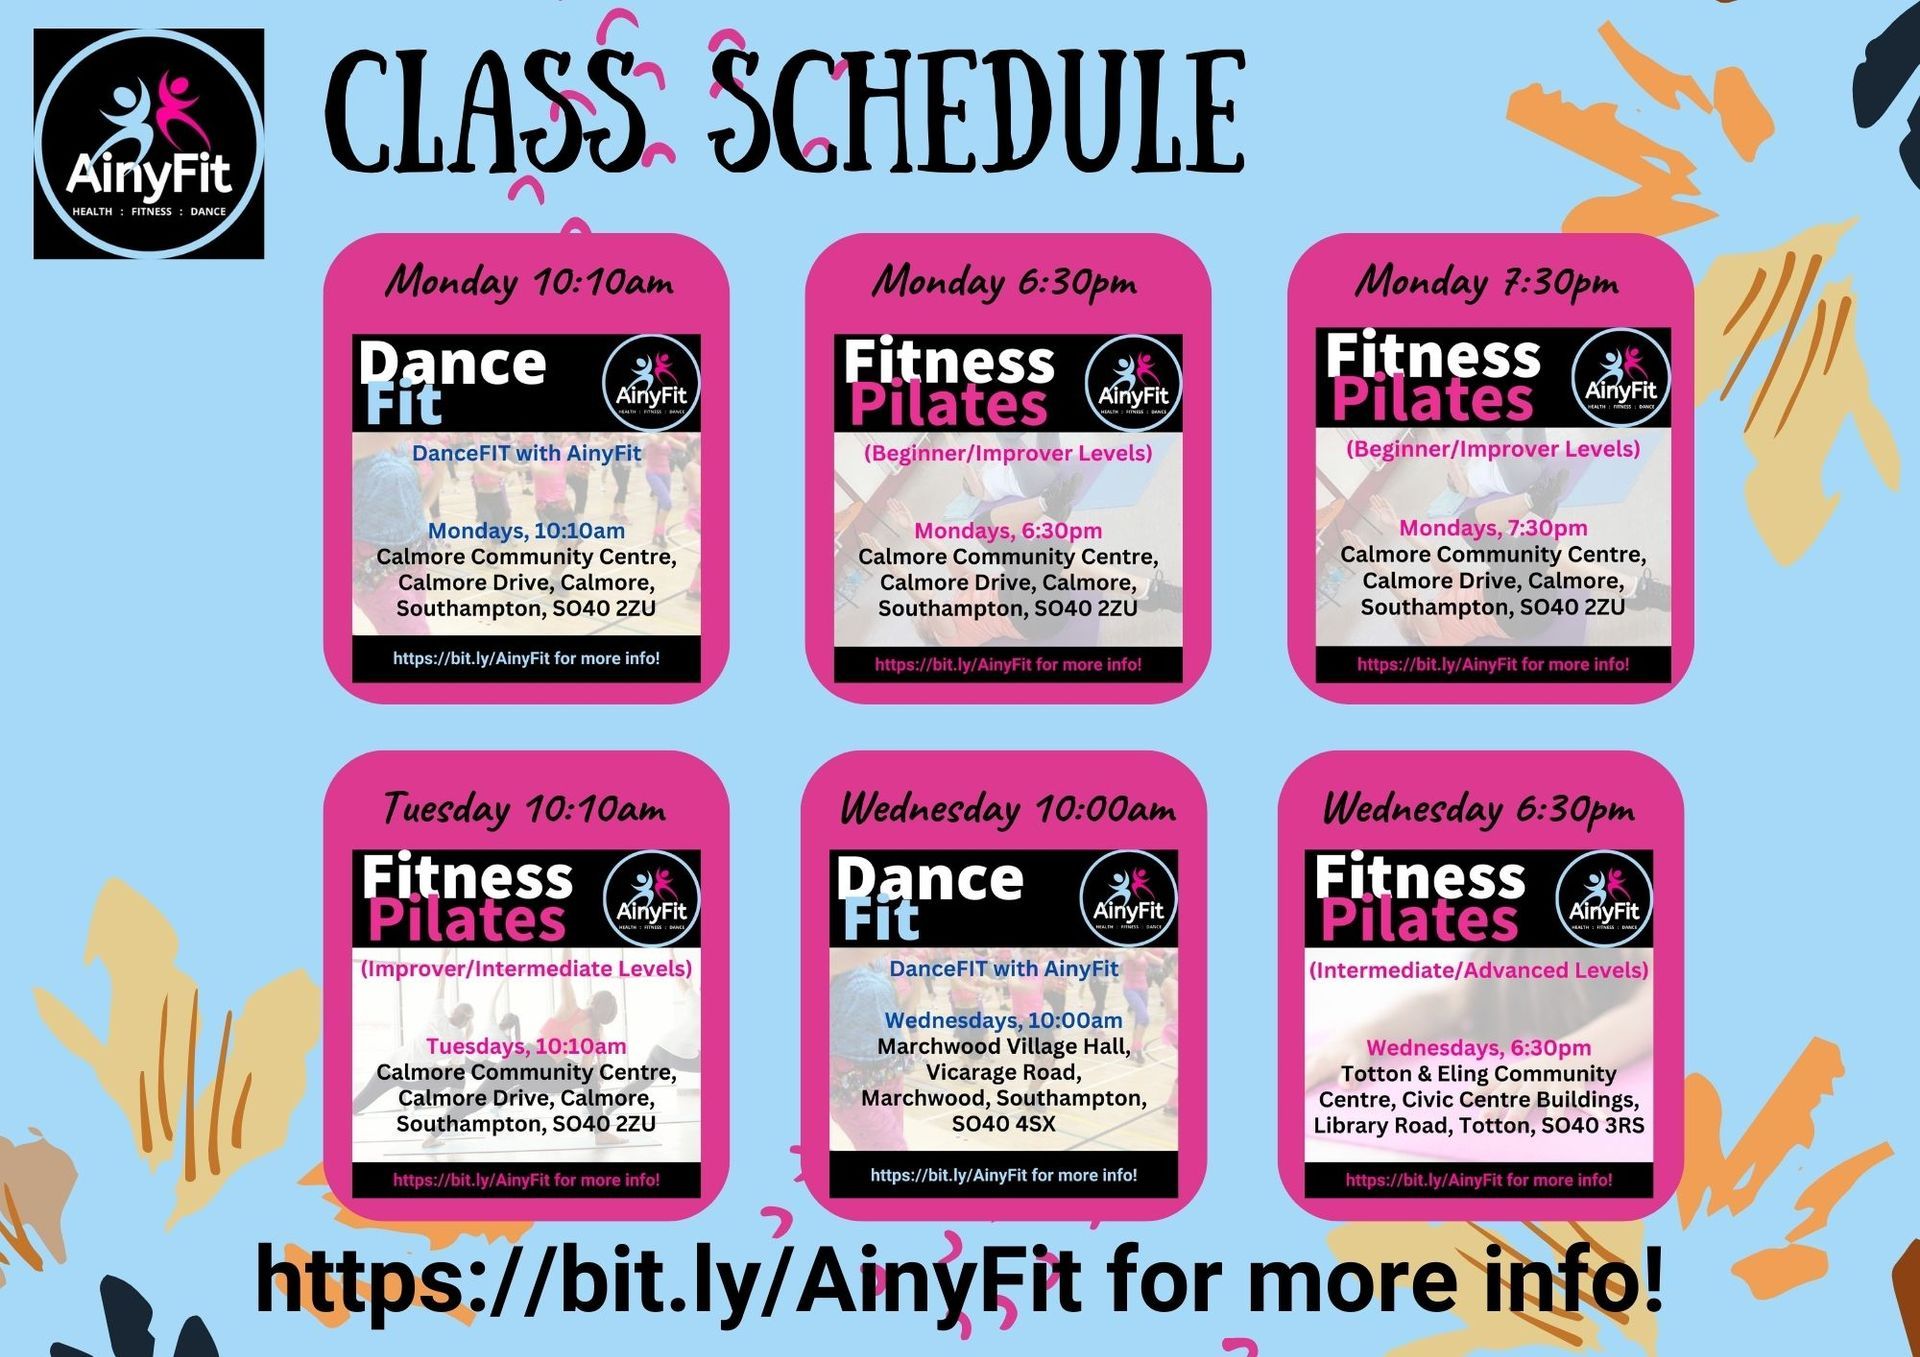 AinyFit's regular schedule for DanceFIT and Fitness PILATES Classes at a glance